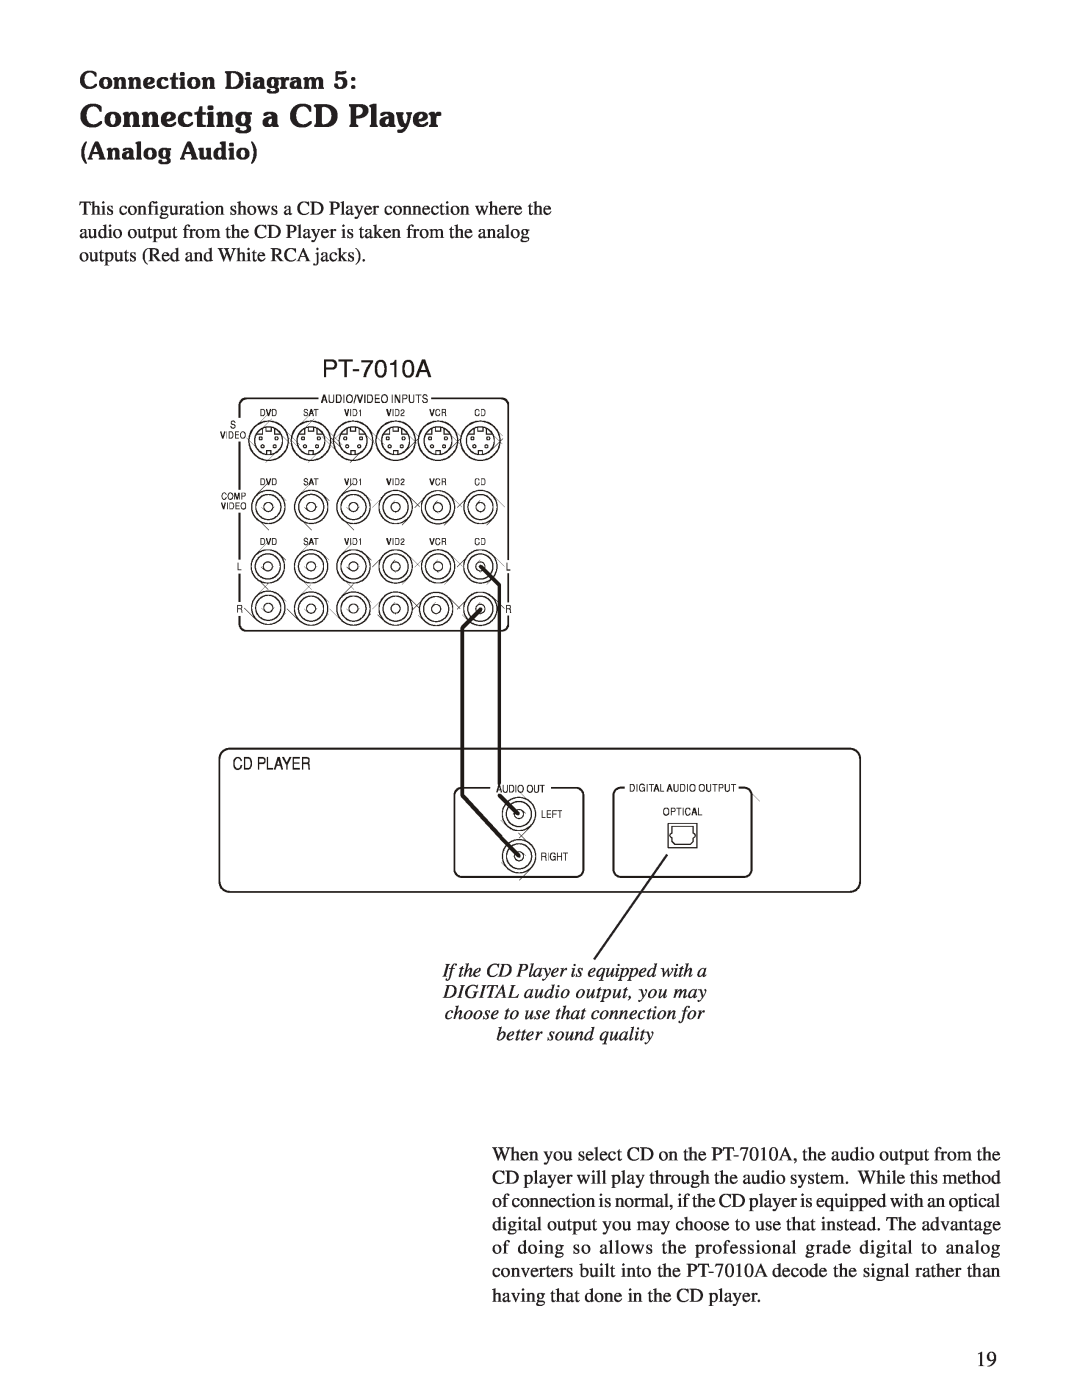 Sherbourn Technologies PT-7010A owner manual Connecting a CD Player, Analog Audio, Connection Diagram 